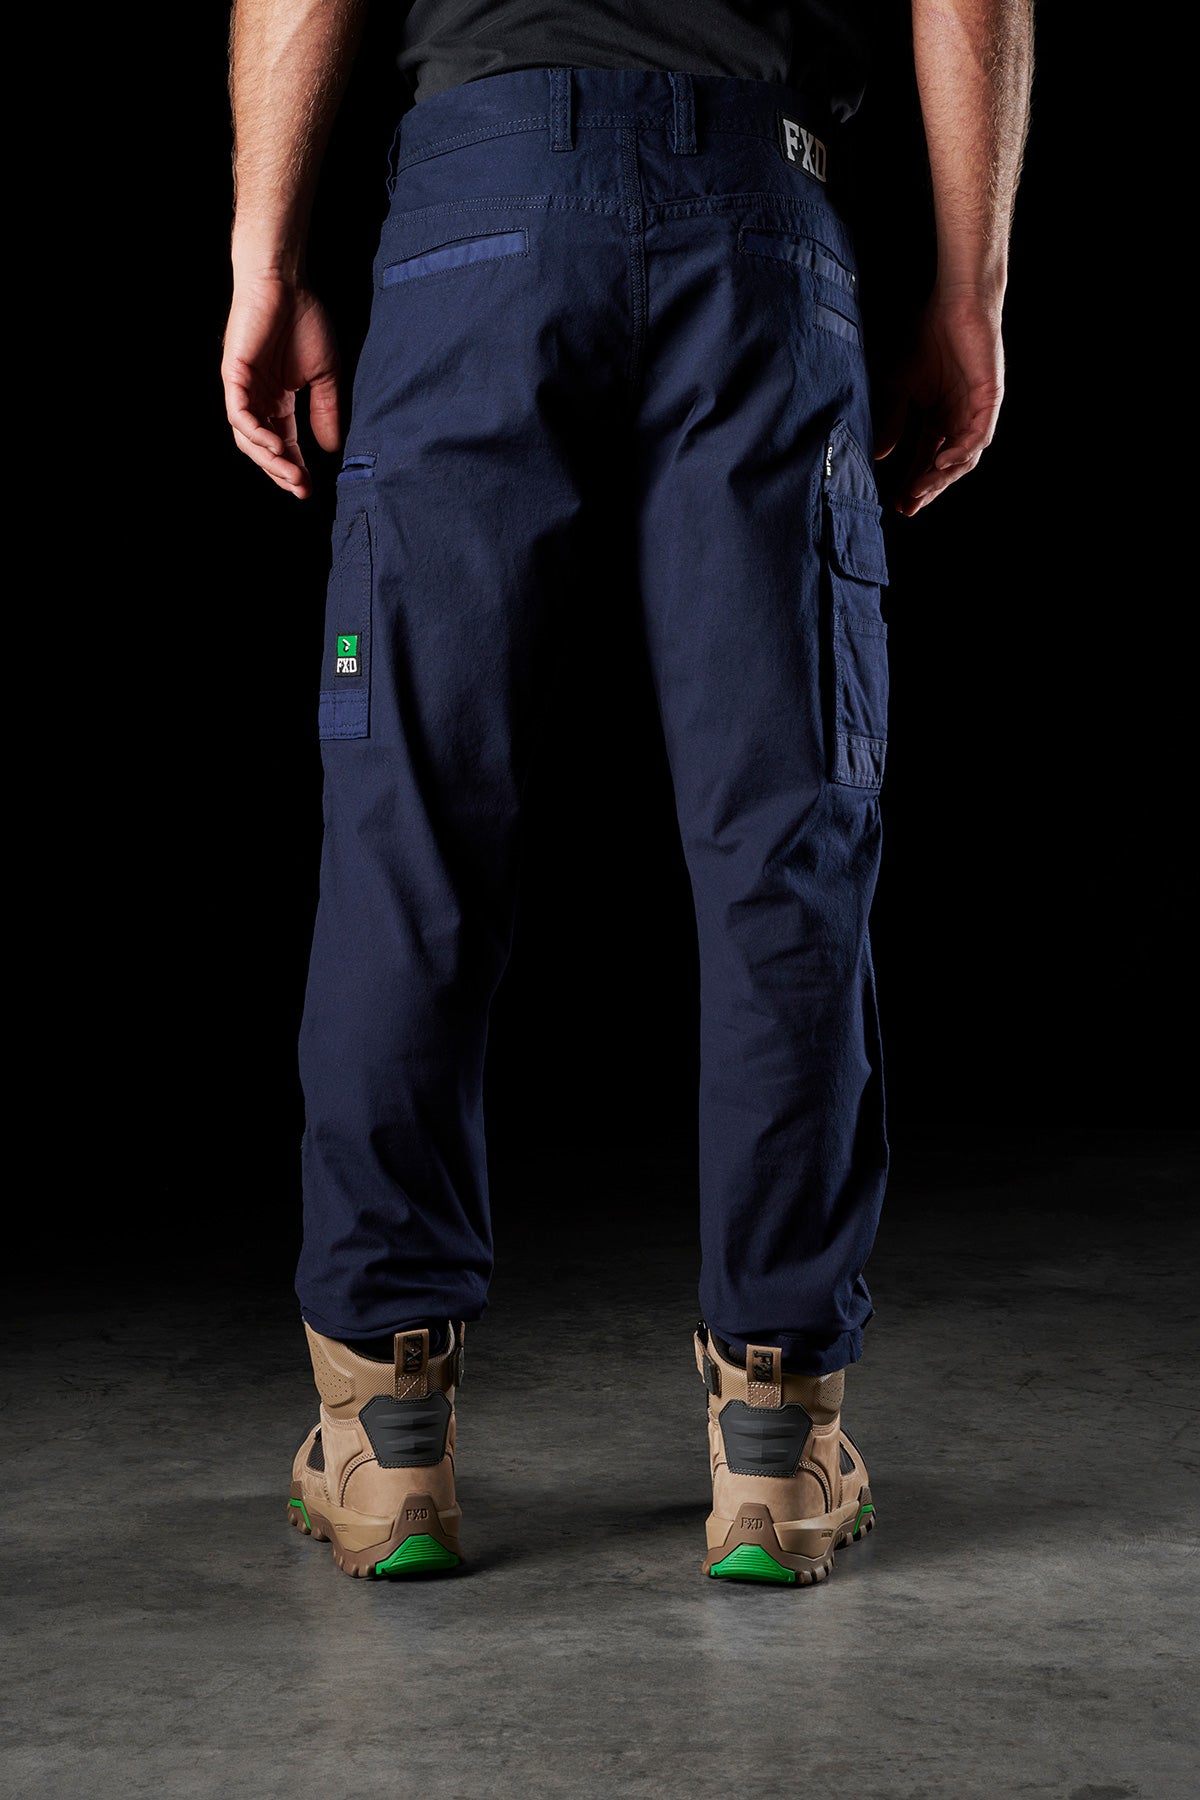 Fxd Men's Utility Multi Pocket Stretch Work Pant - Yeager's